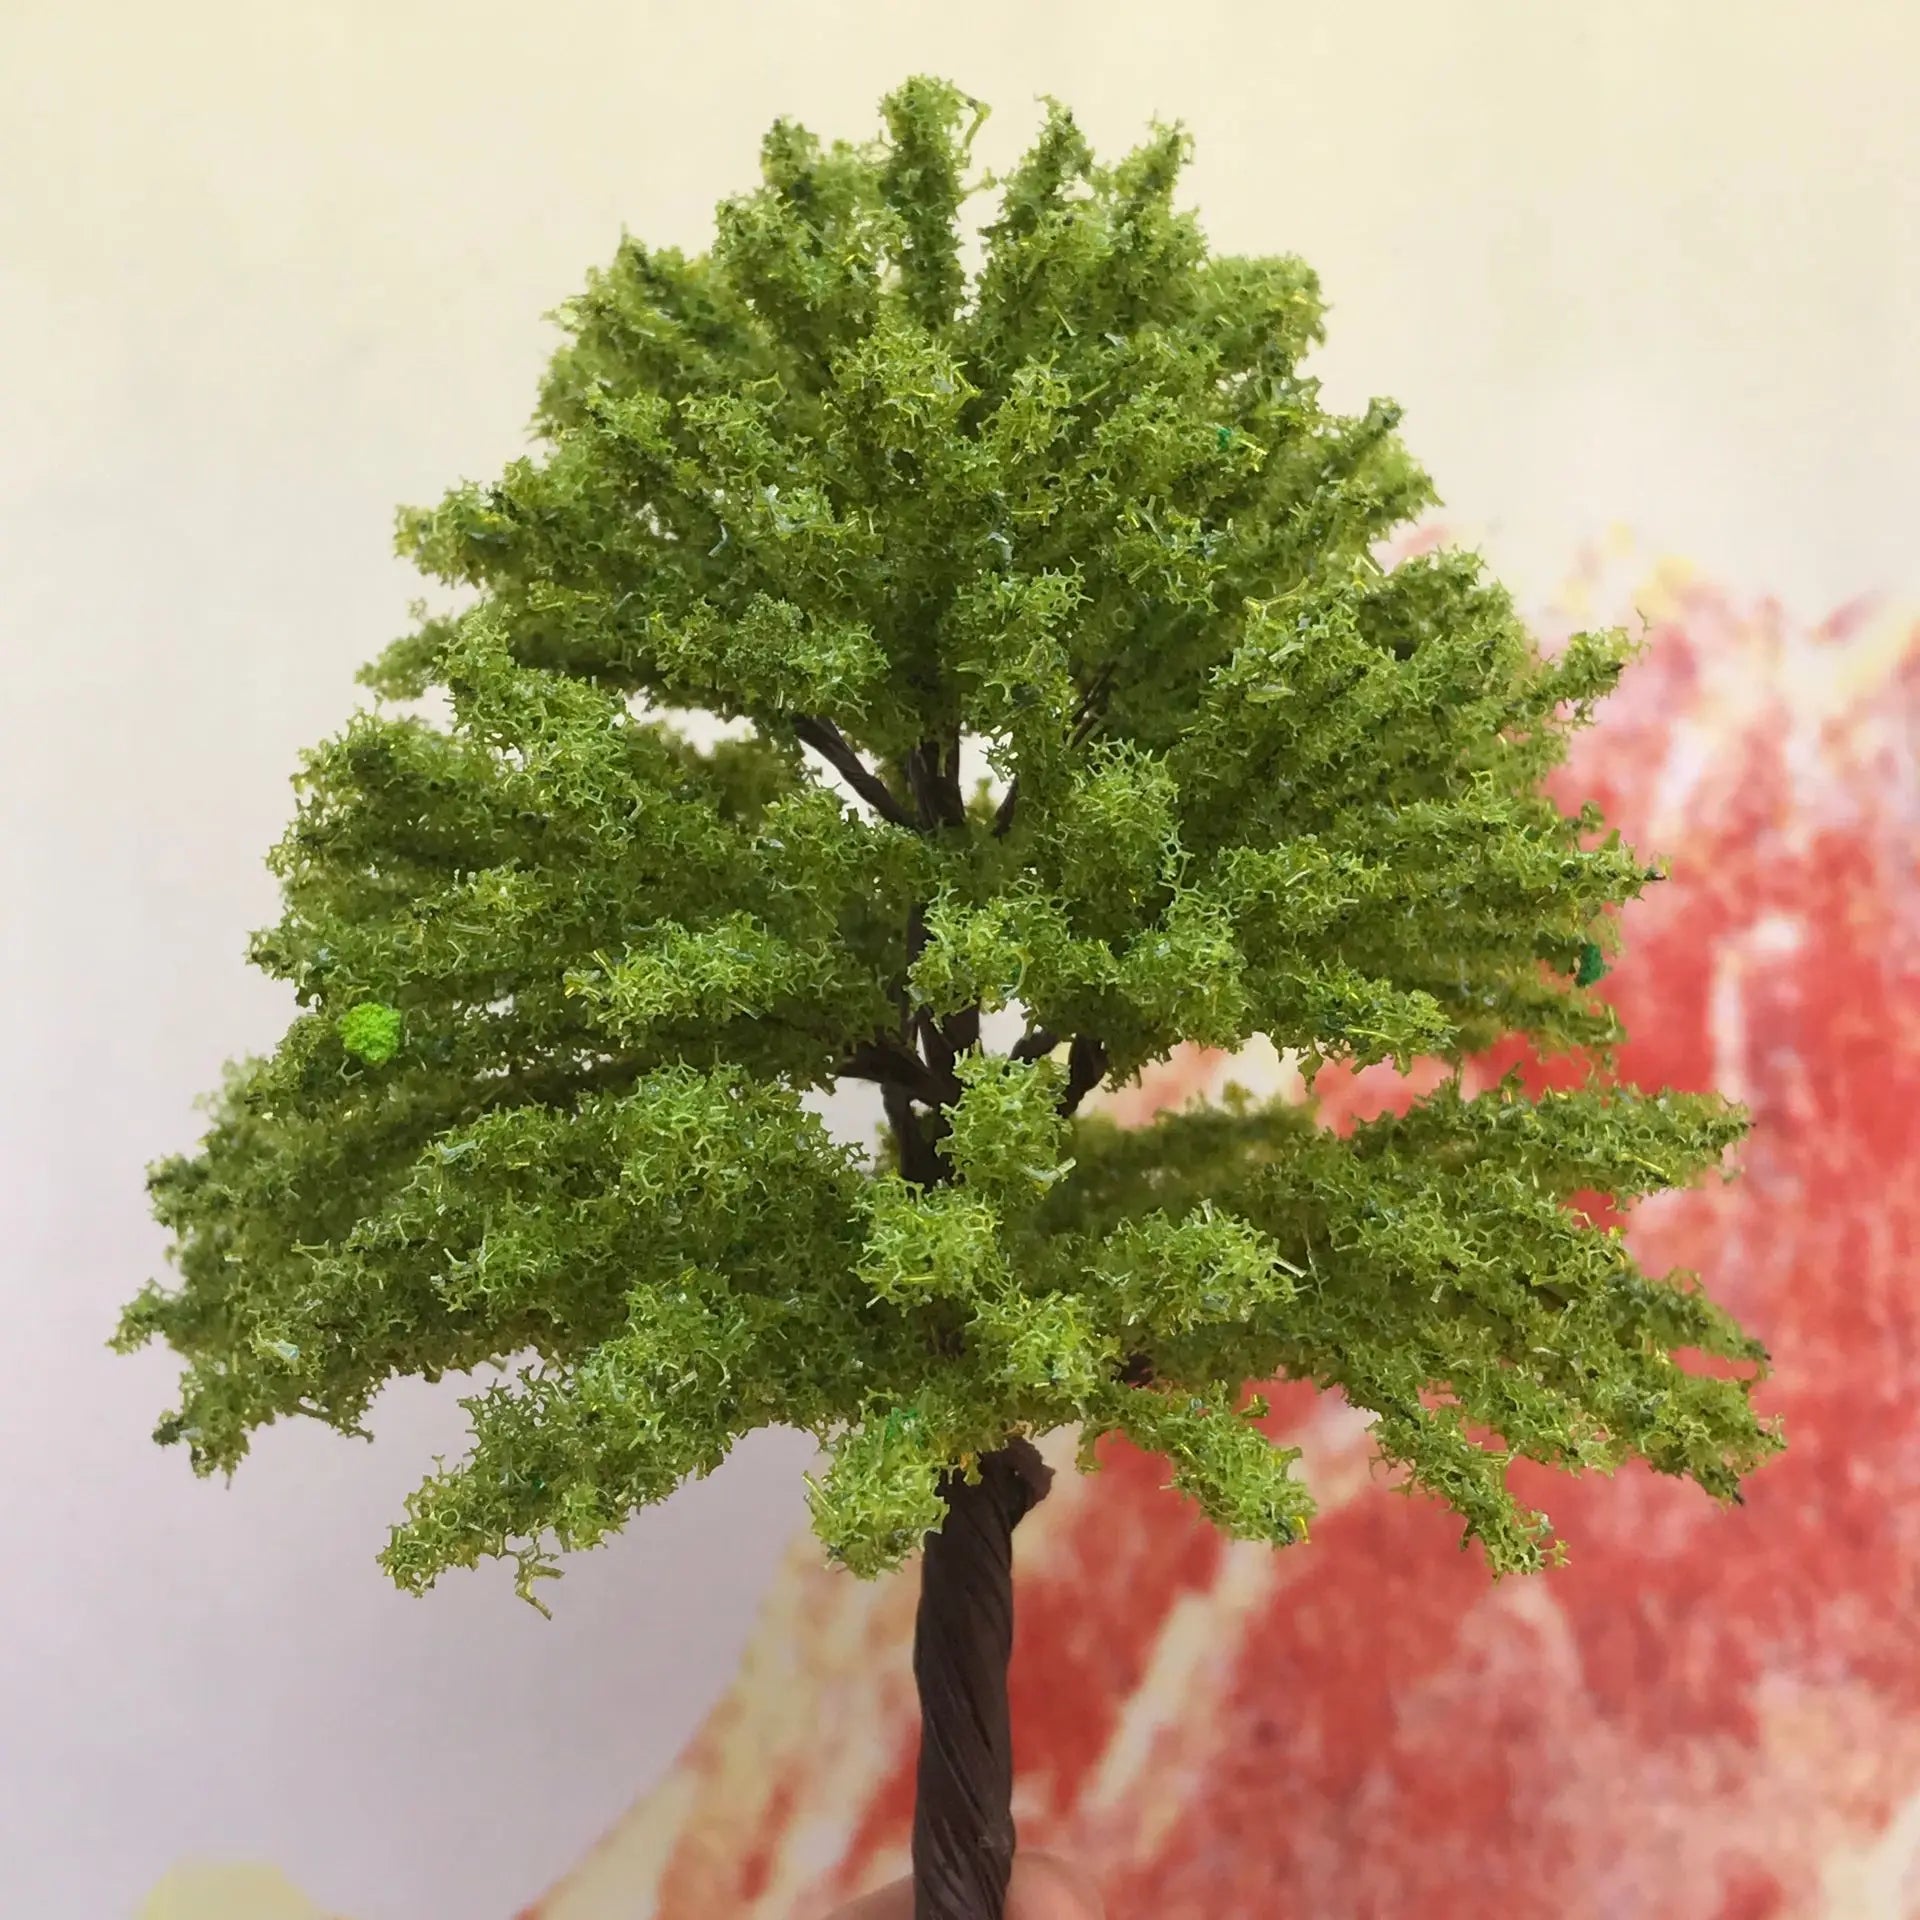 Shunshengmodel HO Scale Miniature Model Trees - Perfect for Railroad, Wargame Layouts, and Scenery Dioramas